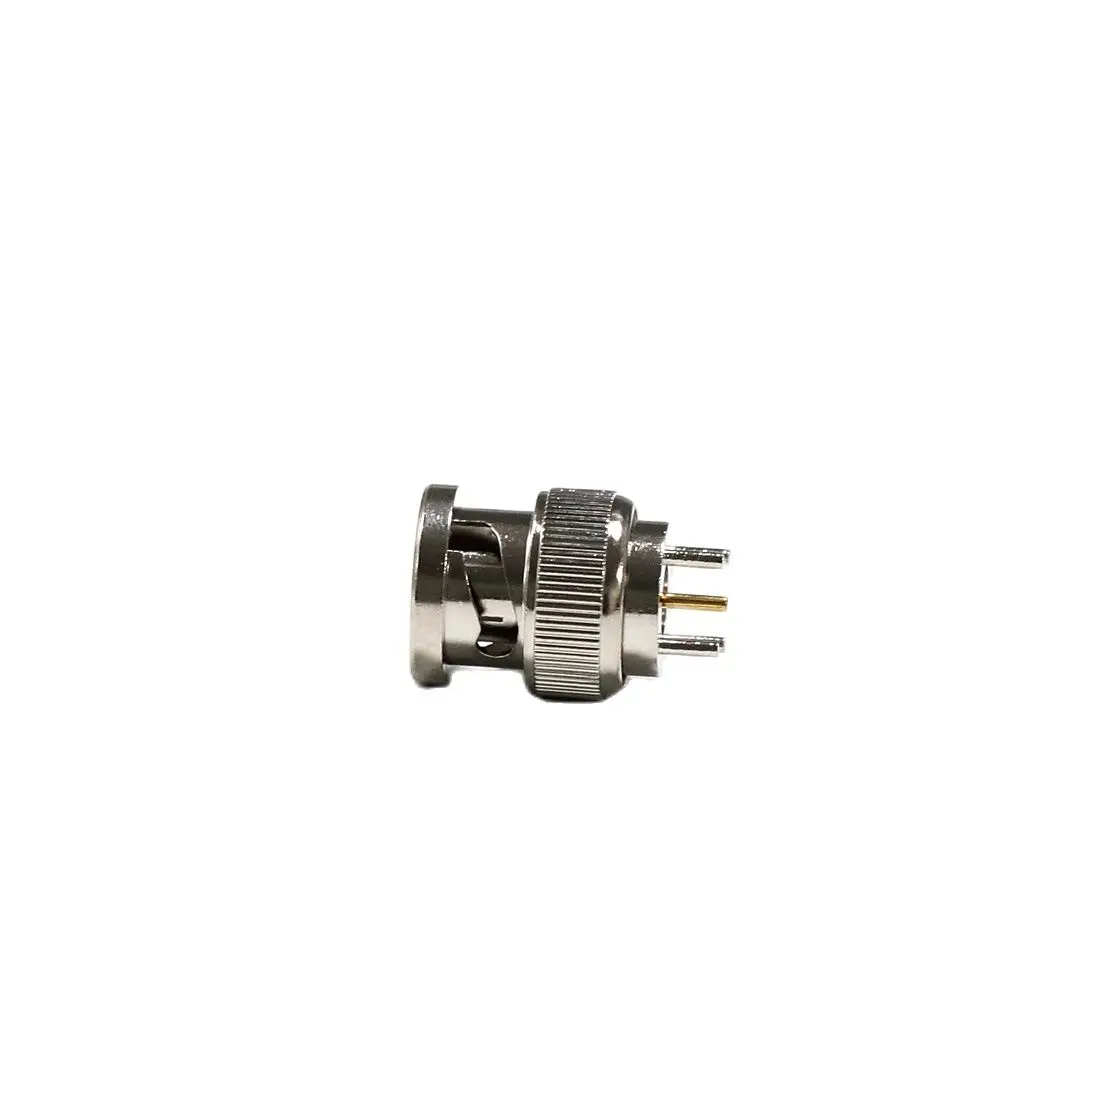 1pc BNC Male Plug RF Coax Connector Through Hole PCB Mount Straight Type Nickelplated NEW Wire Terminal Wholesale Price